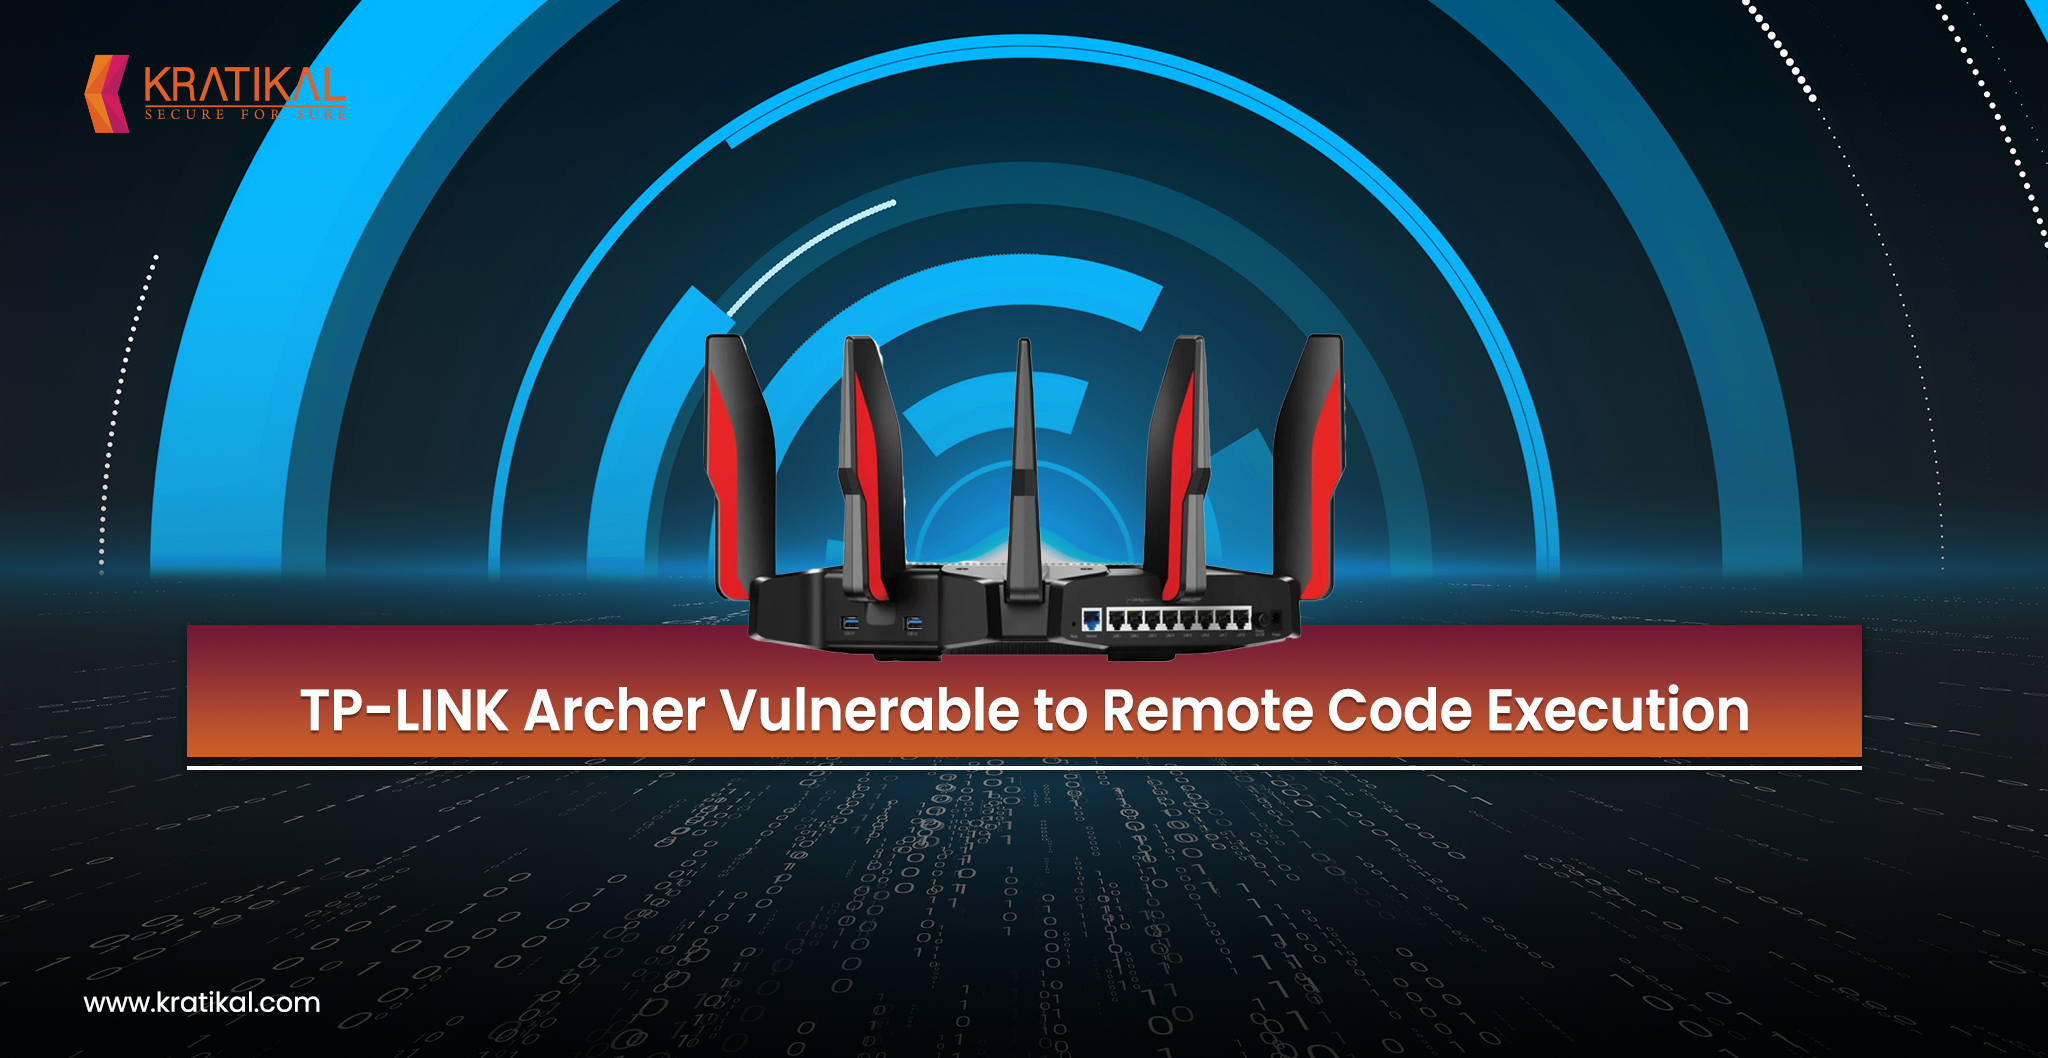 TP-LINK Archer Vulnerable to Remote Code Execution